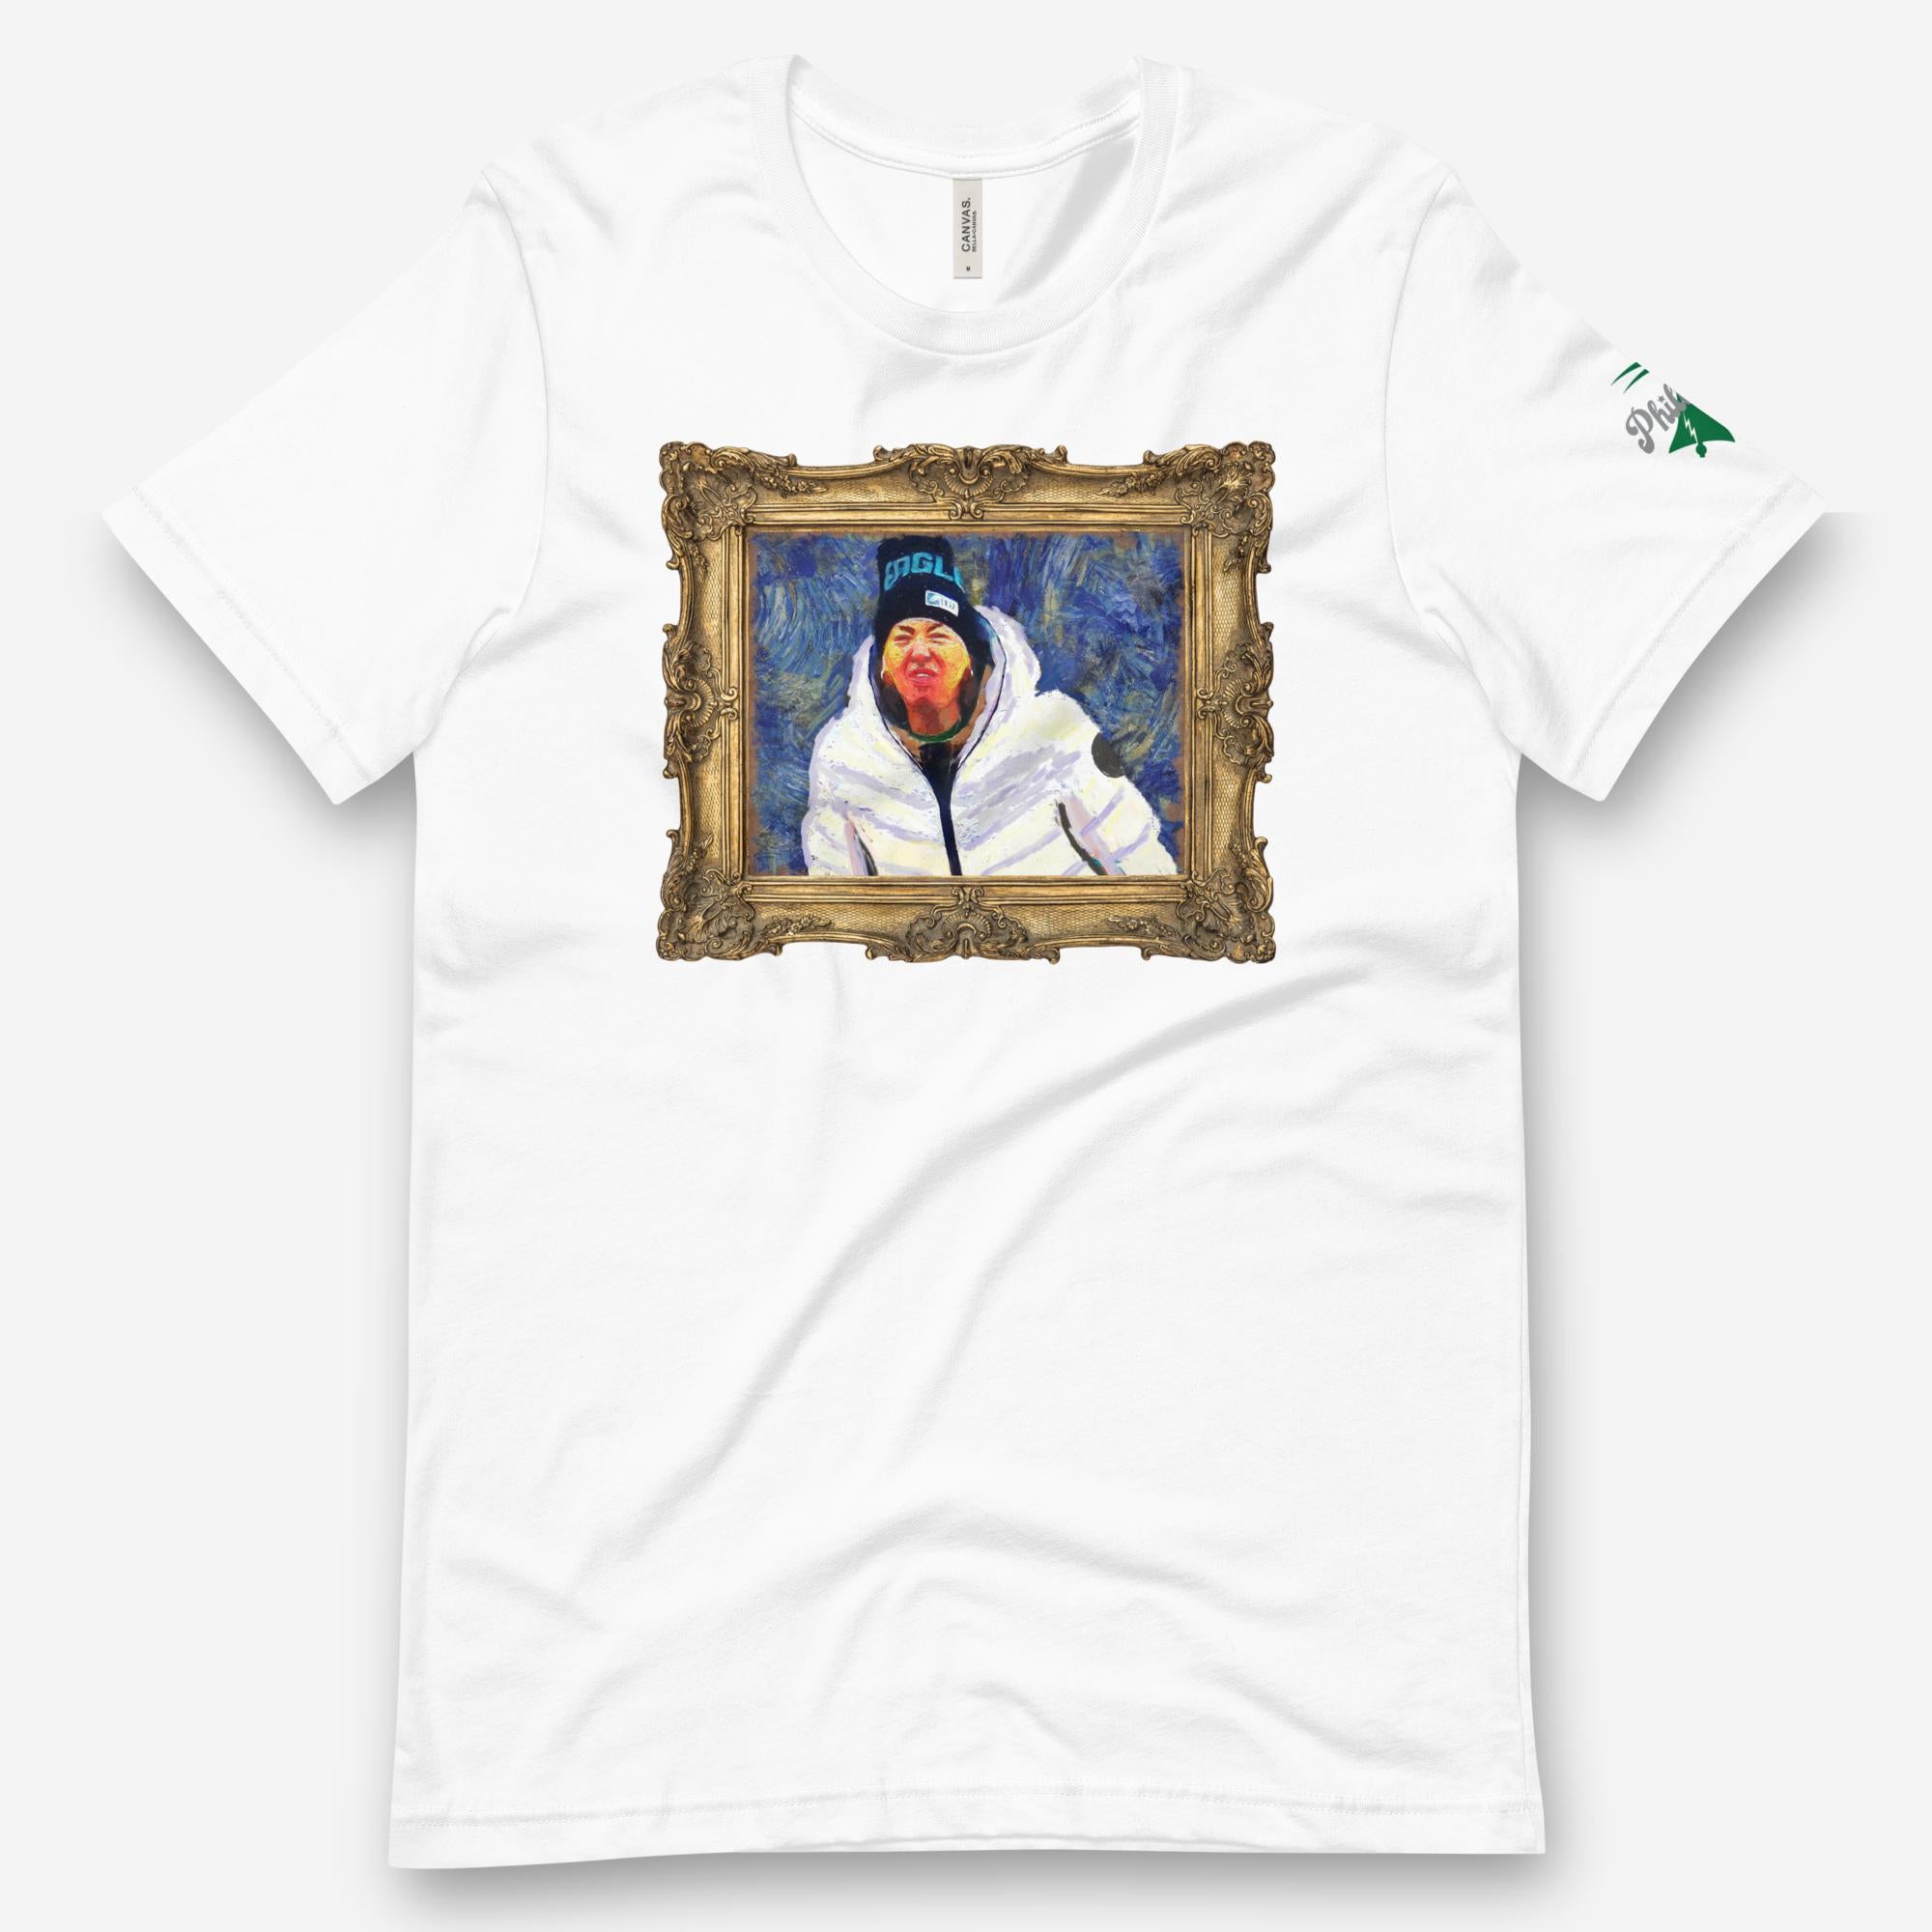 "Angry Lady Birds Fan Mid-Obscenity Masterpiece" Tee